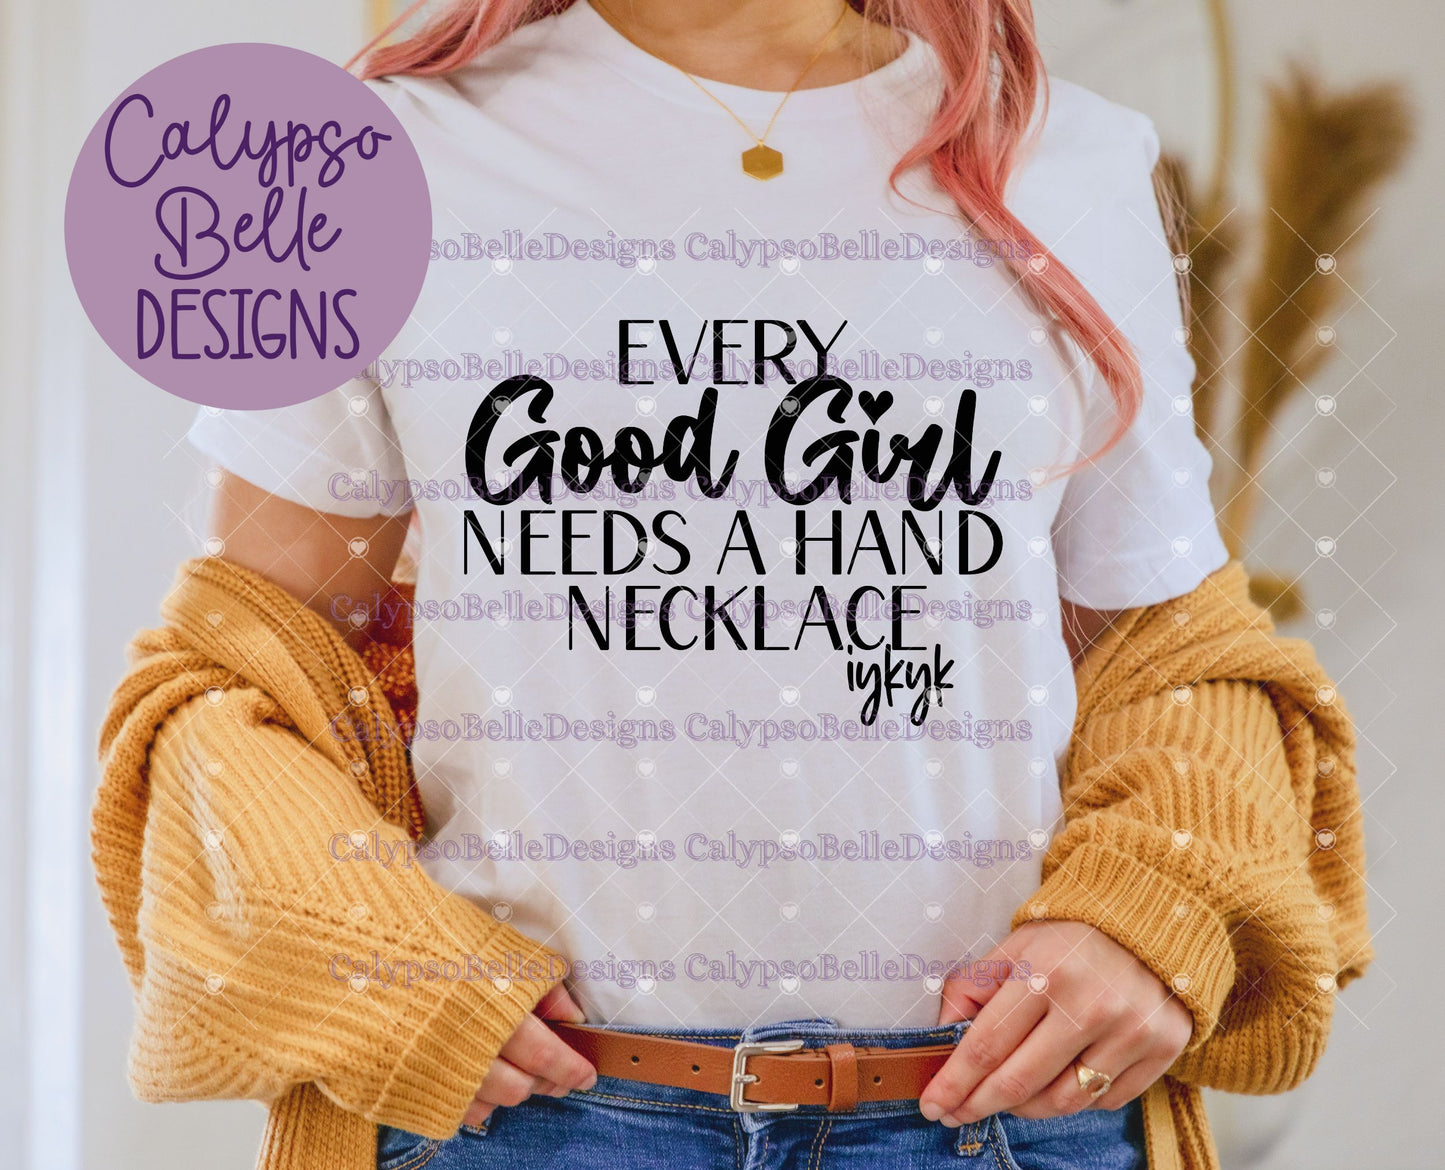 Every Good Girl Needs a Hand Necklace Design